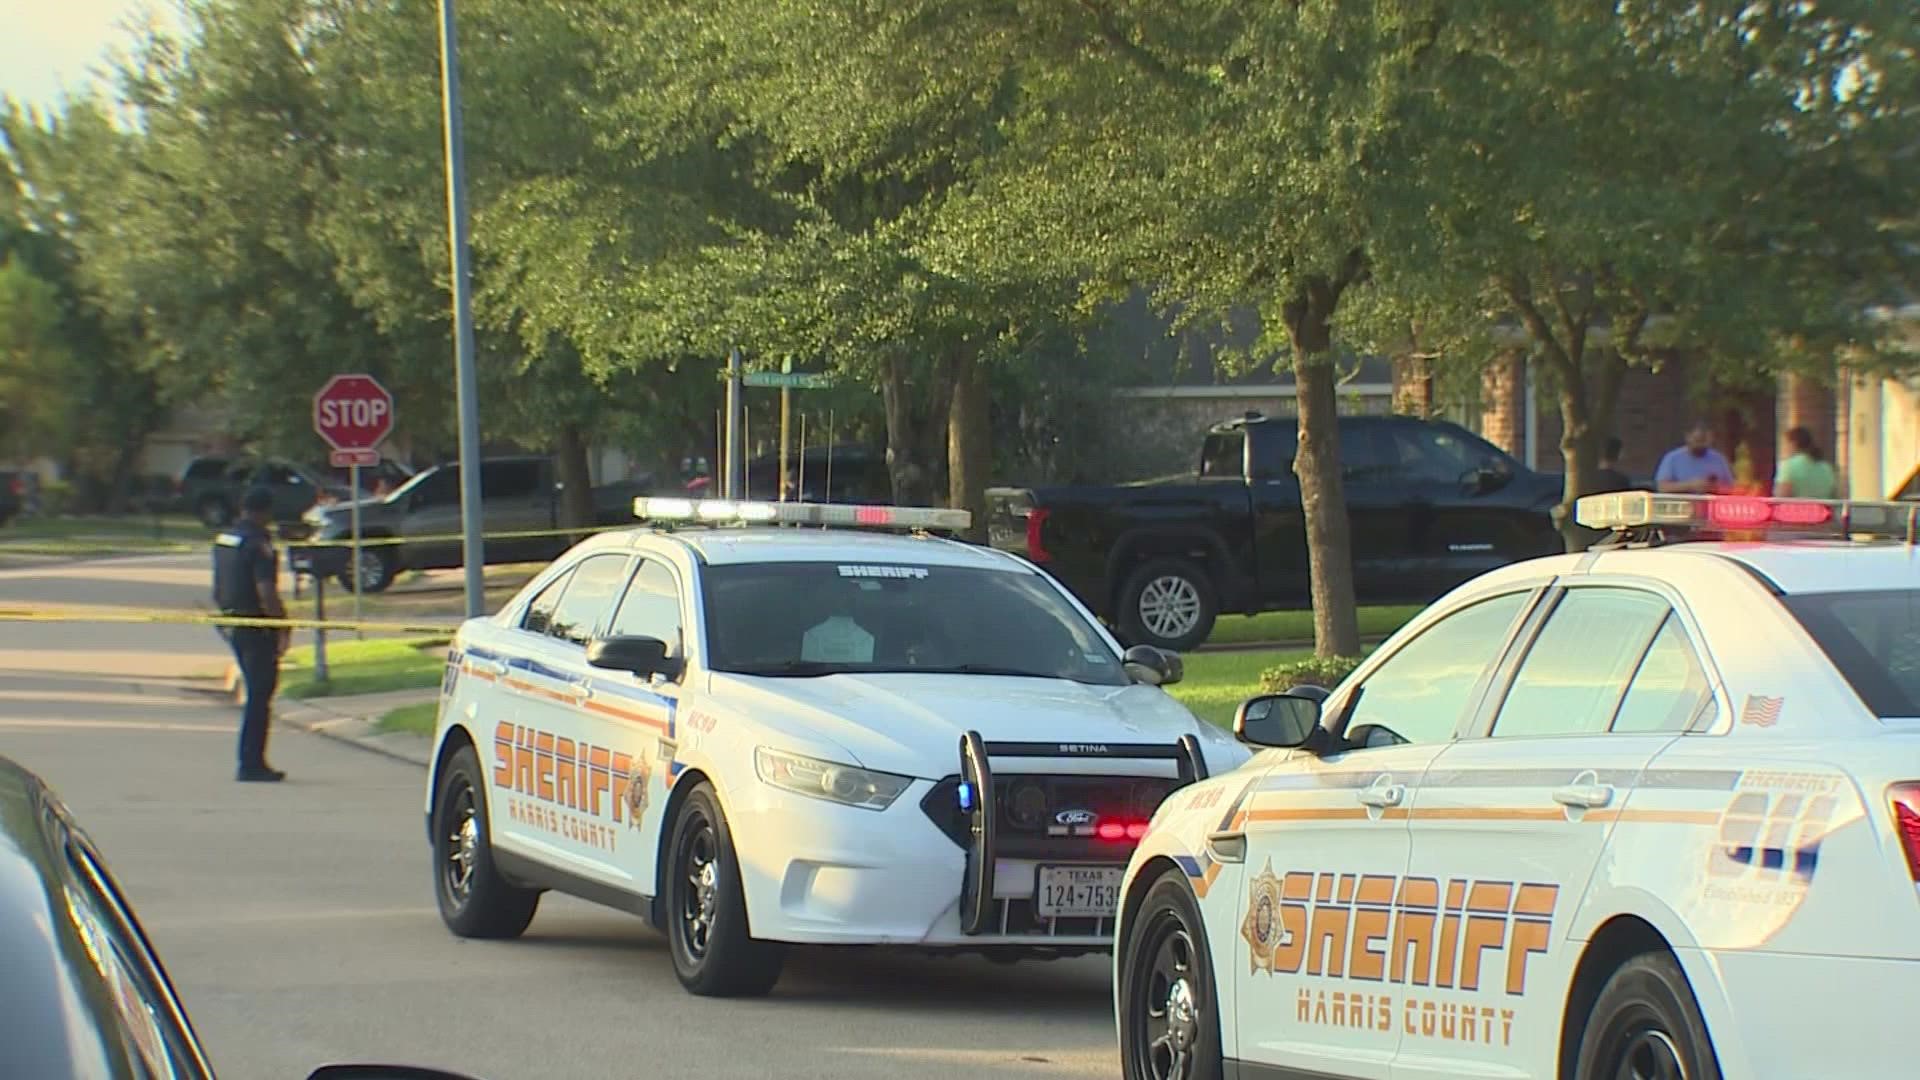 The 14-year-old was shot once in his right thigh and had to be taken to the hospital by Life Flight, deputies said.